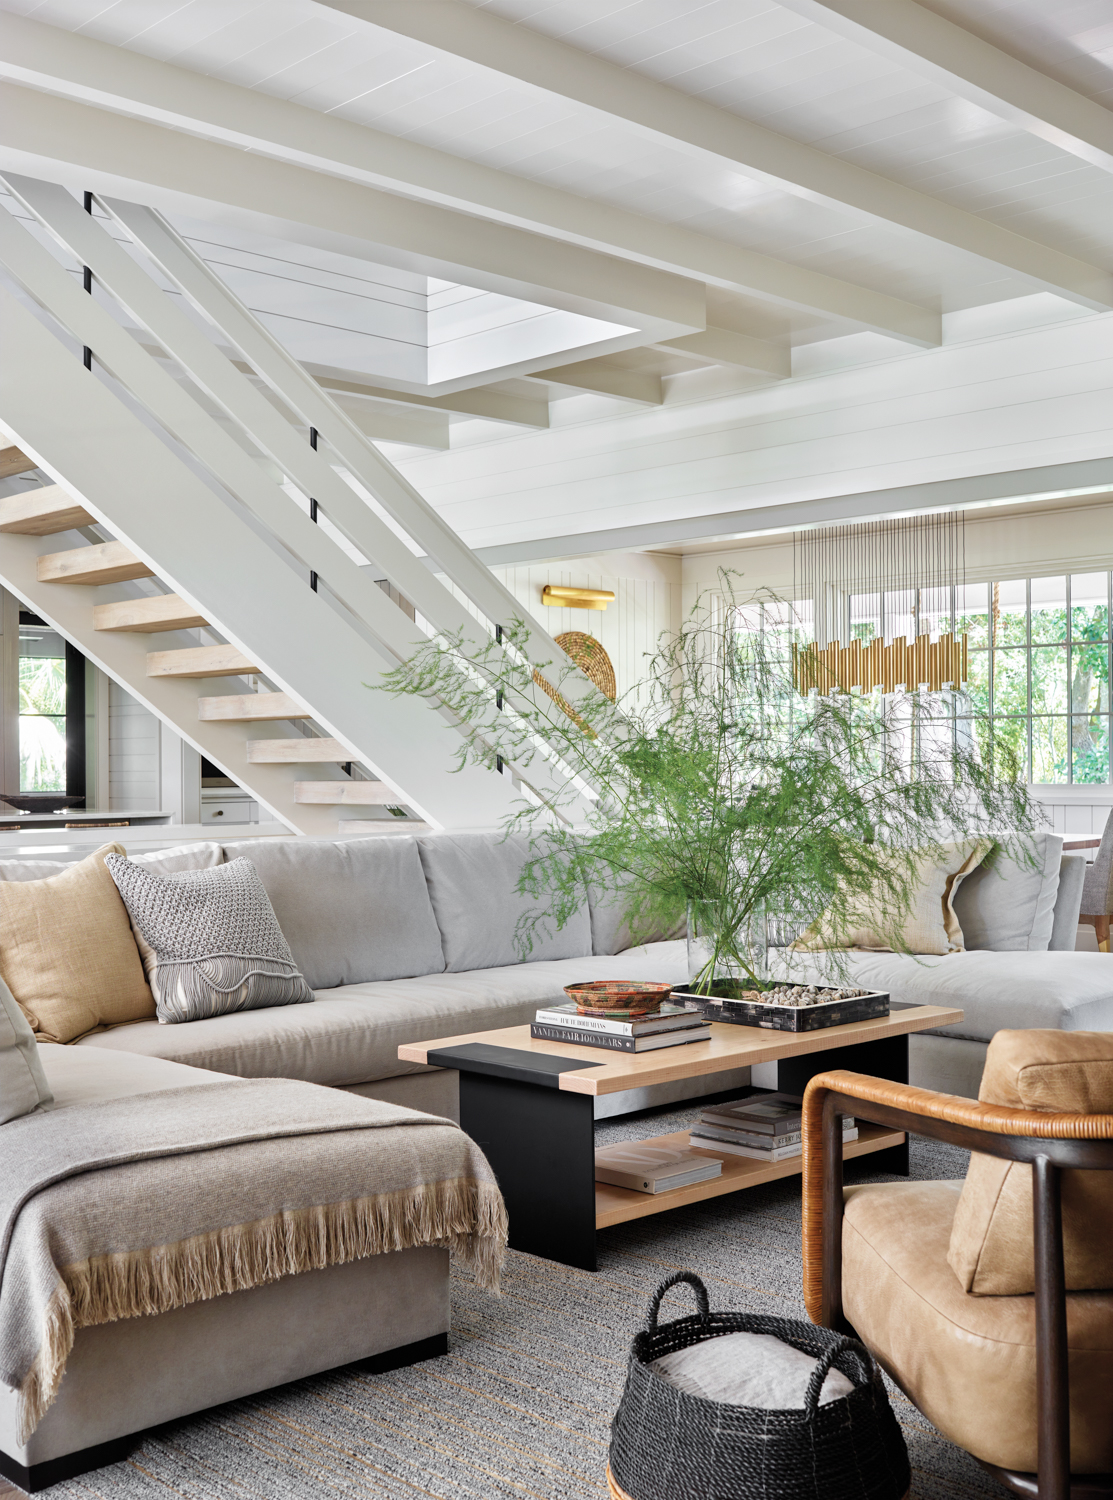 Open-format living space with oversize sectional and prominent staircase